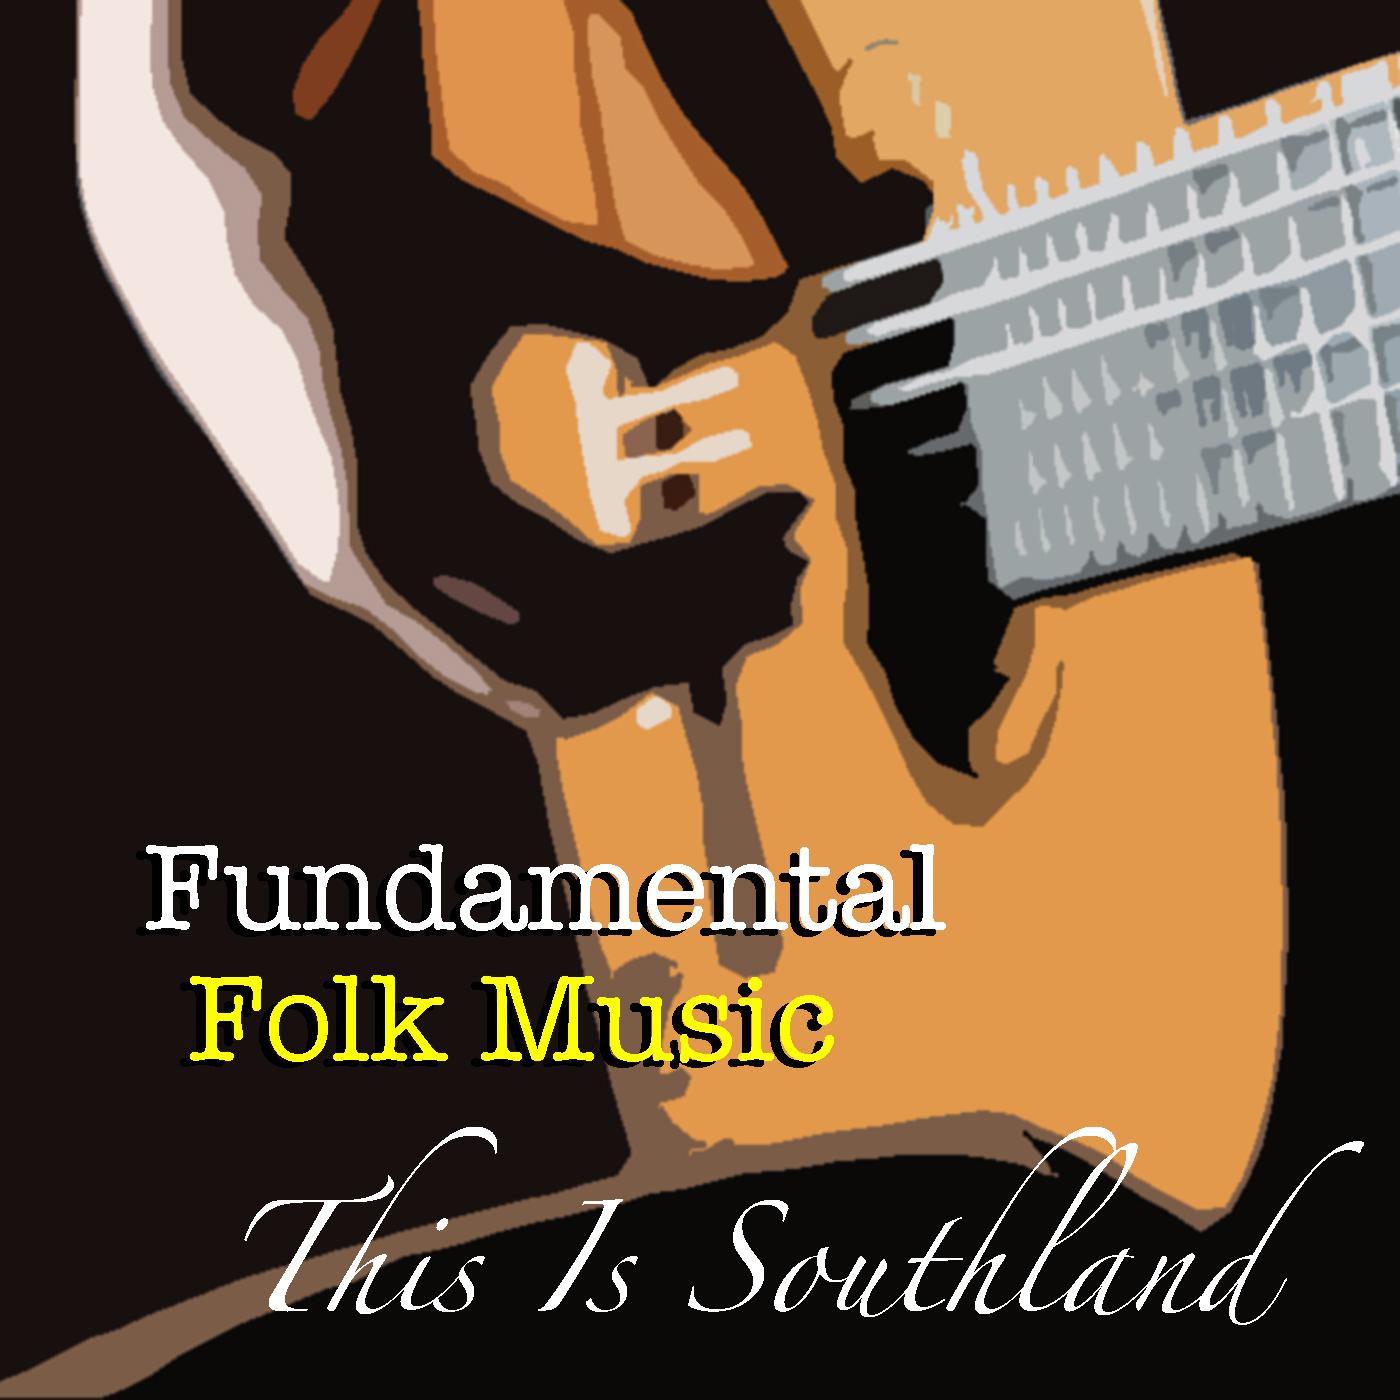 This Is Southland Fundamental Folk Music